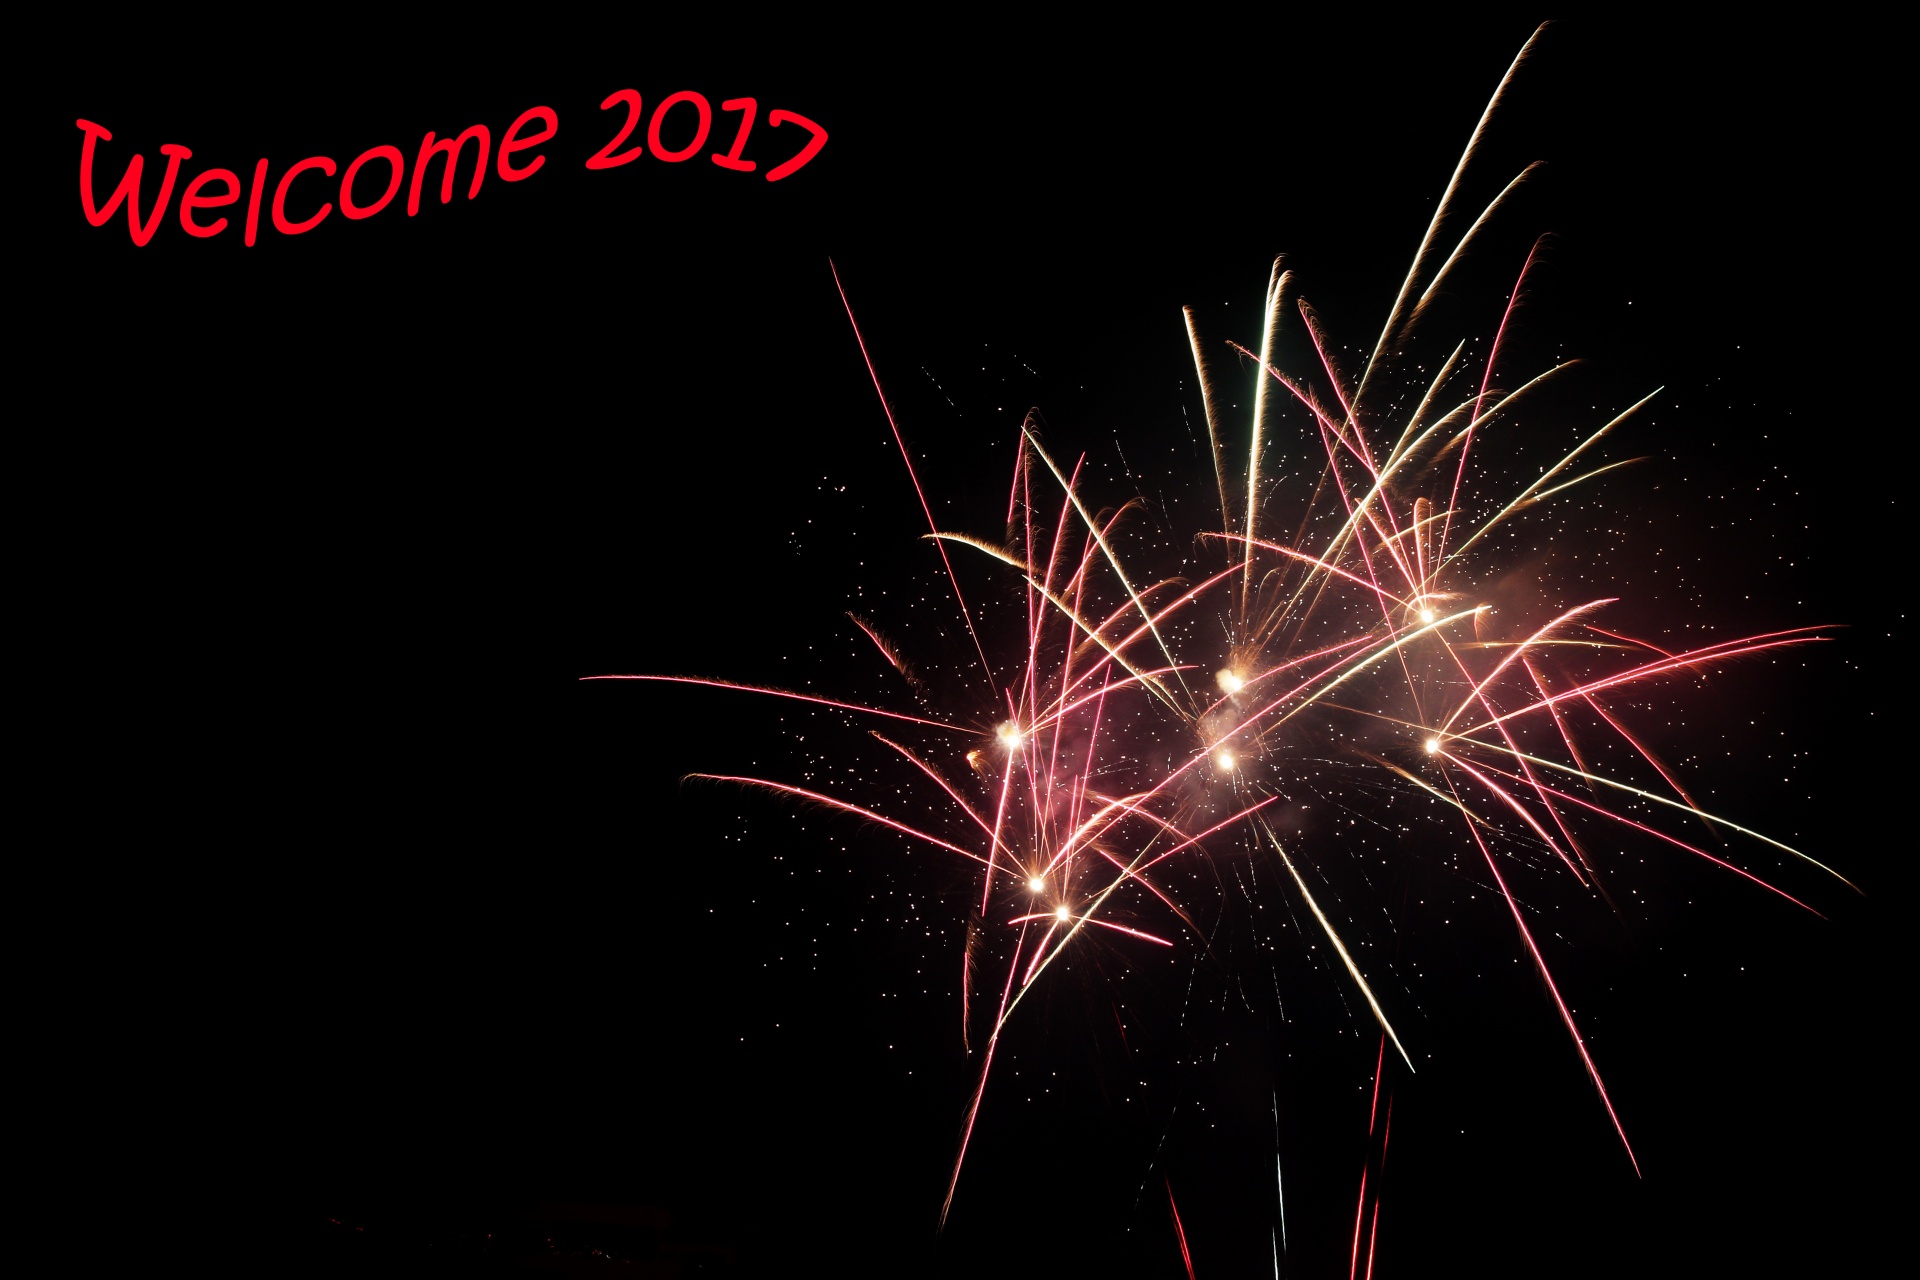 welcome 2017 fireworks welcome 2017 free photo